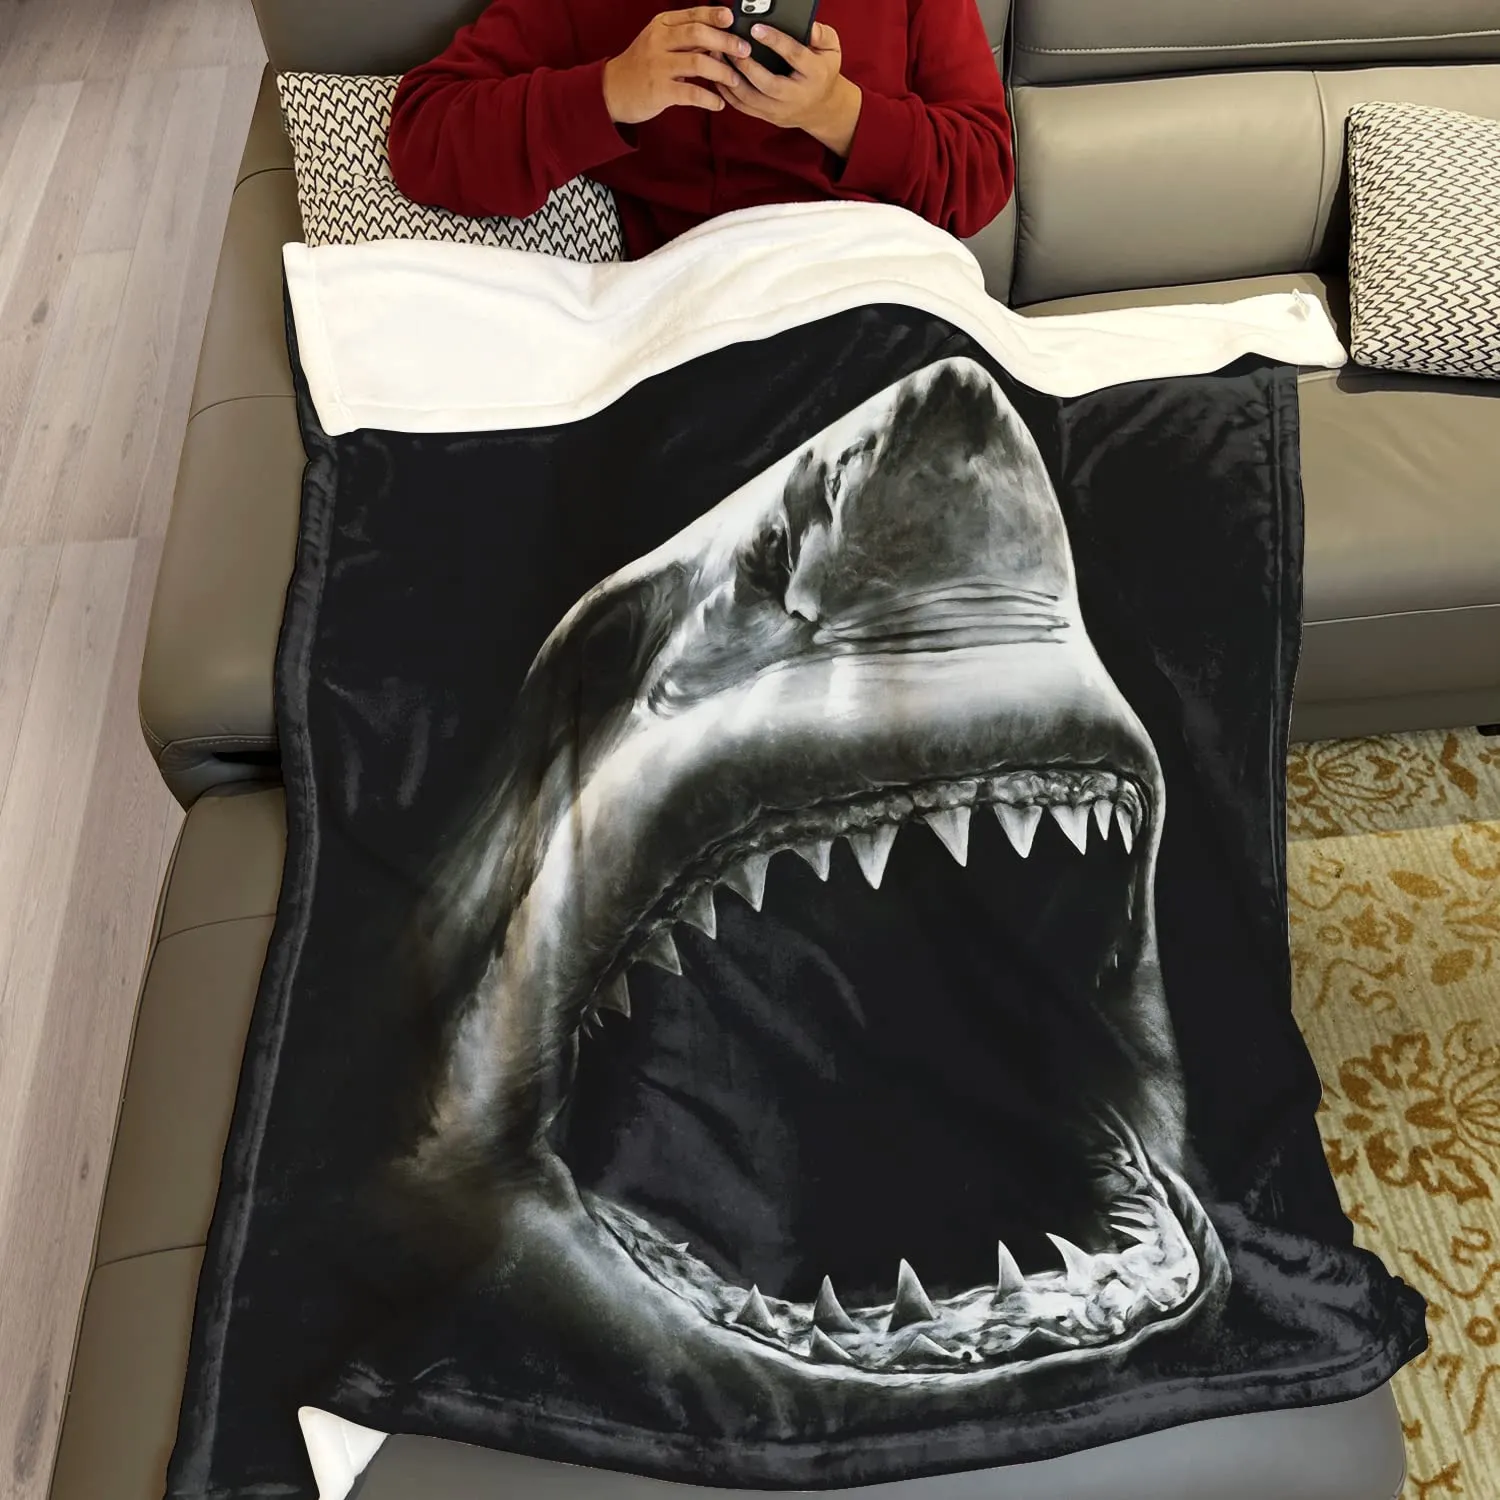 Deep Sea Shark Blanket Comfort Warmth Soft Cozy Easy Care Machine Wash Black Throw Quilt for Sofa Bed Home Decor Gifts